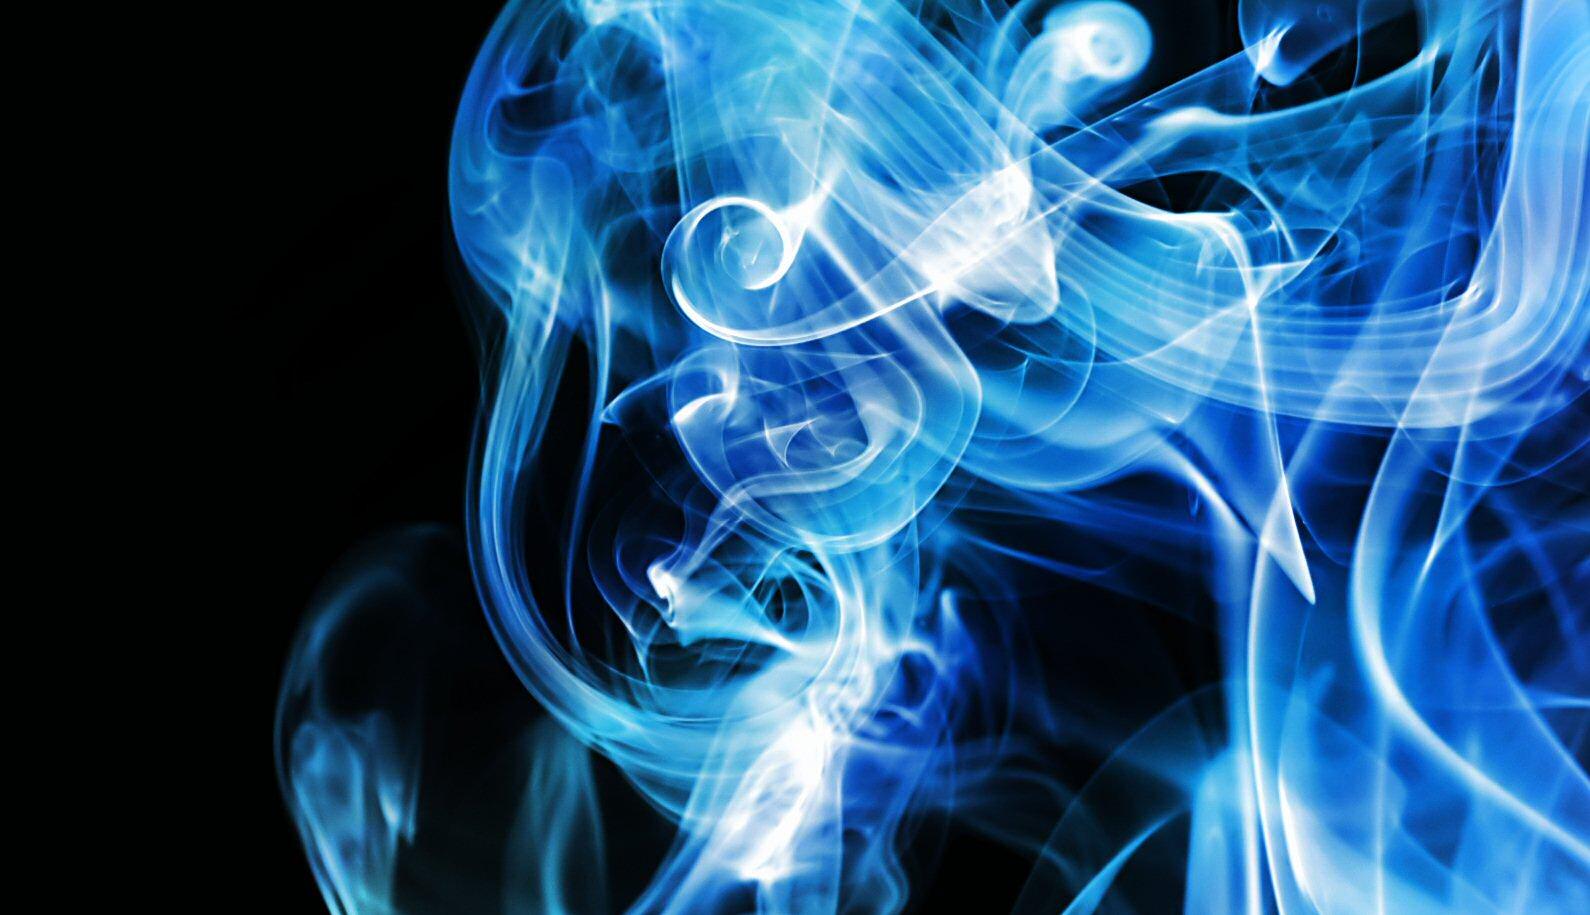 Black And Blue Smoke Wallpapers - Wallpaper Cave